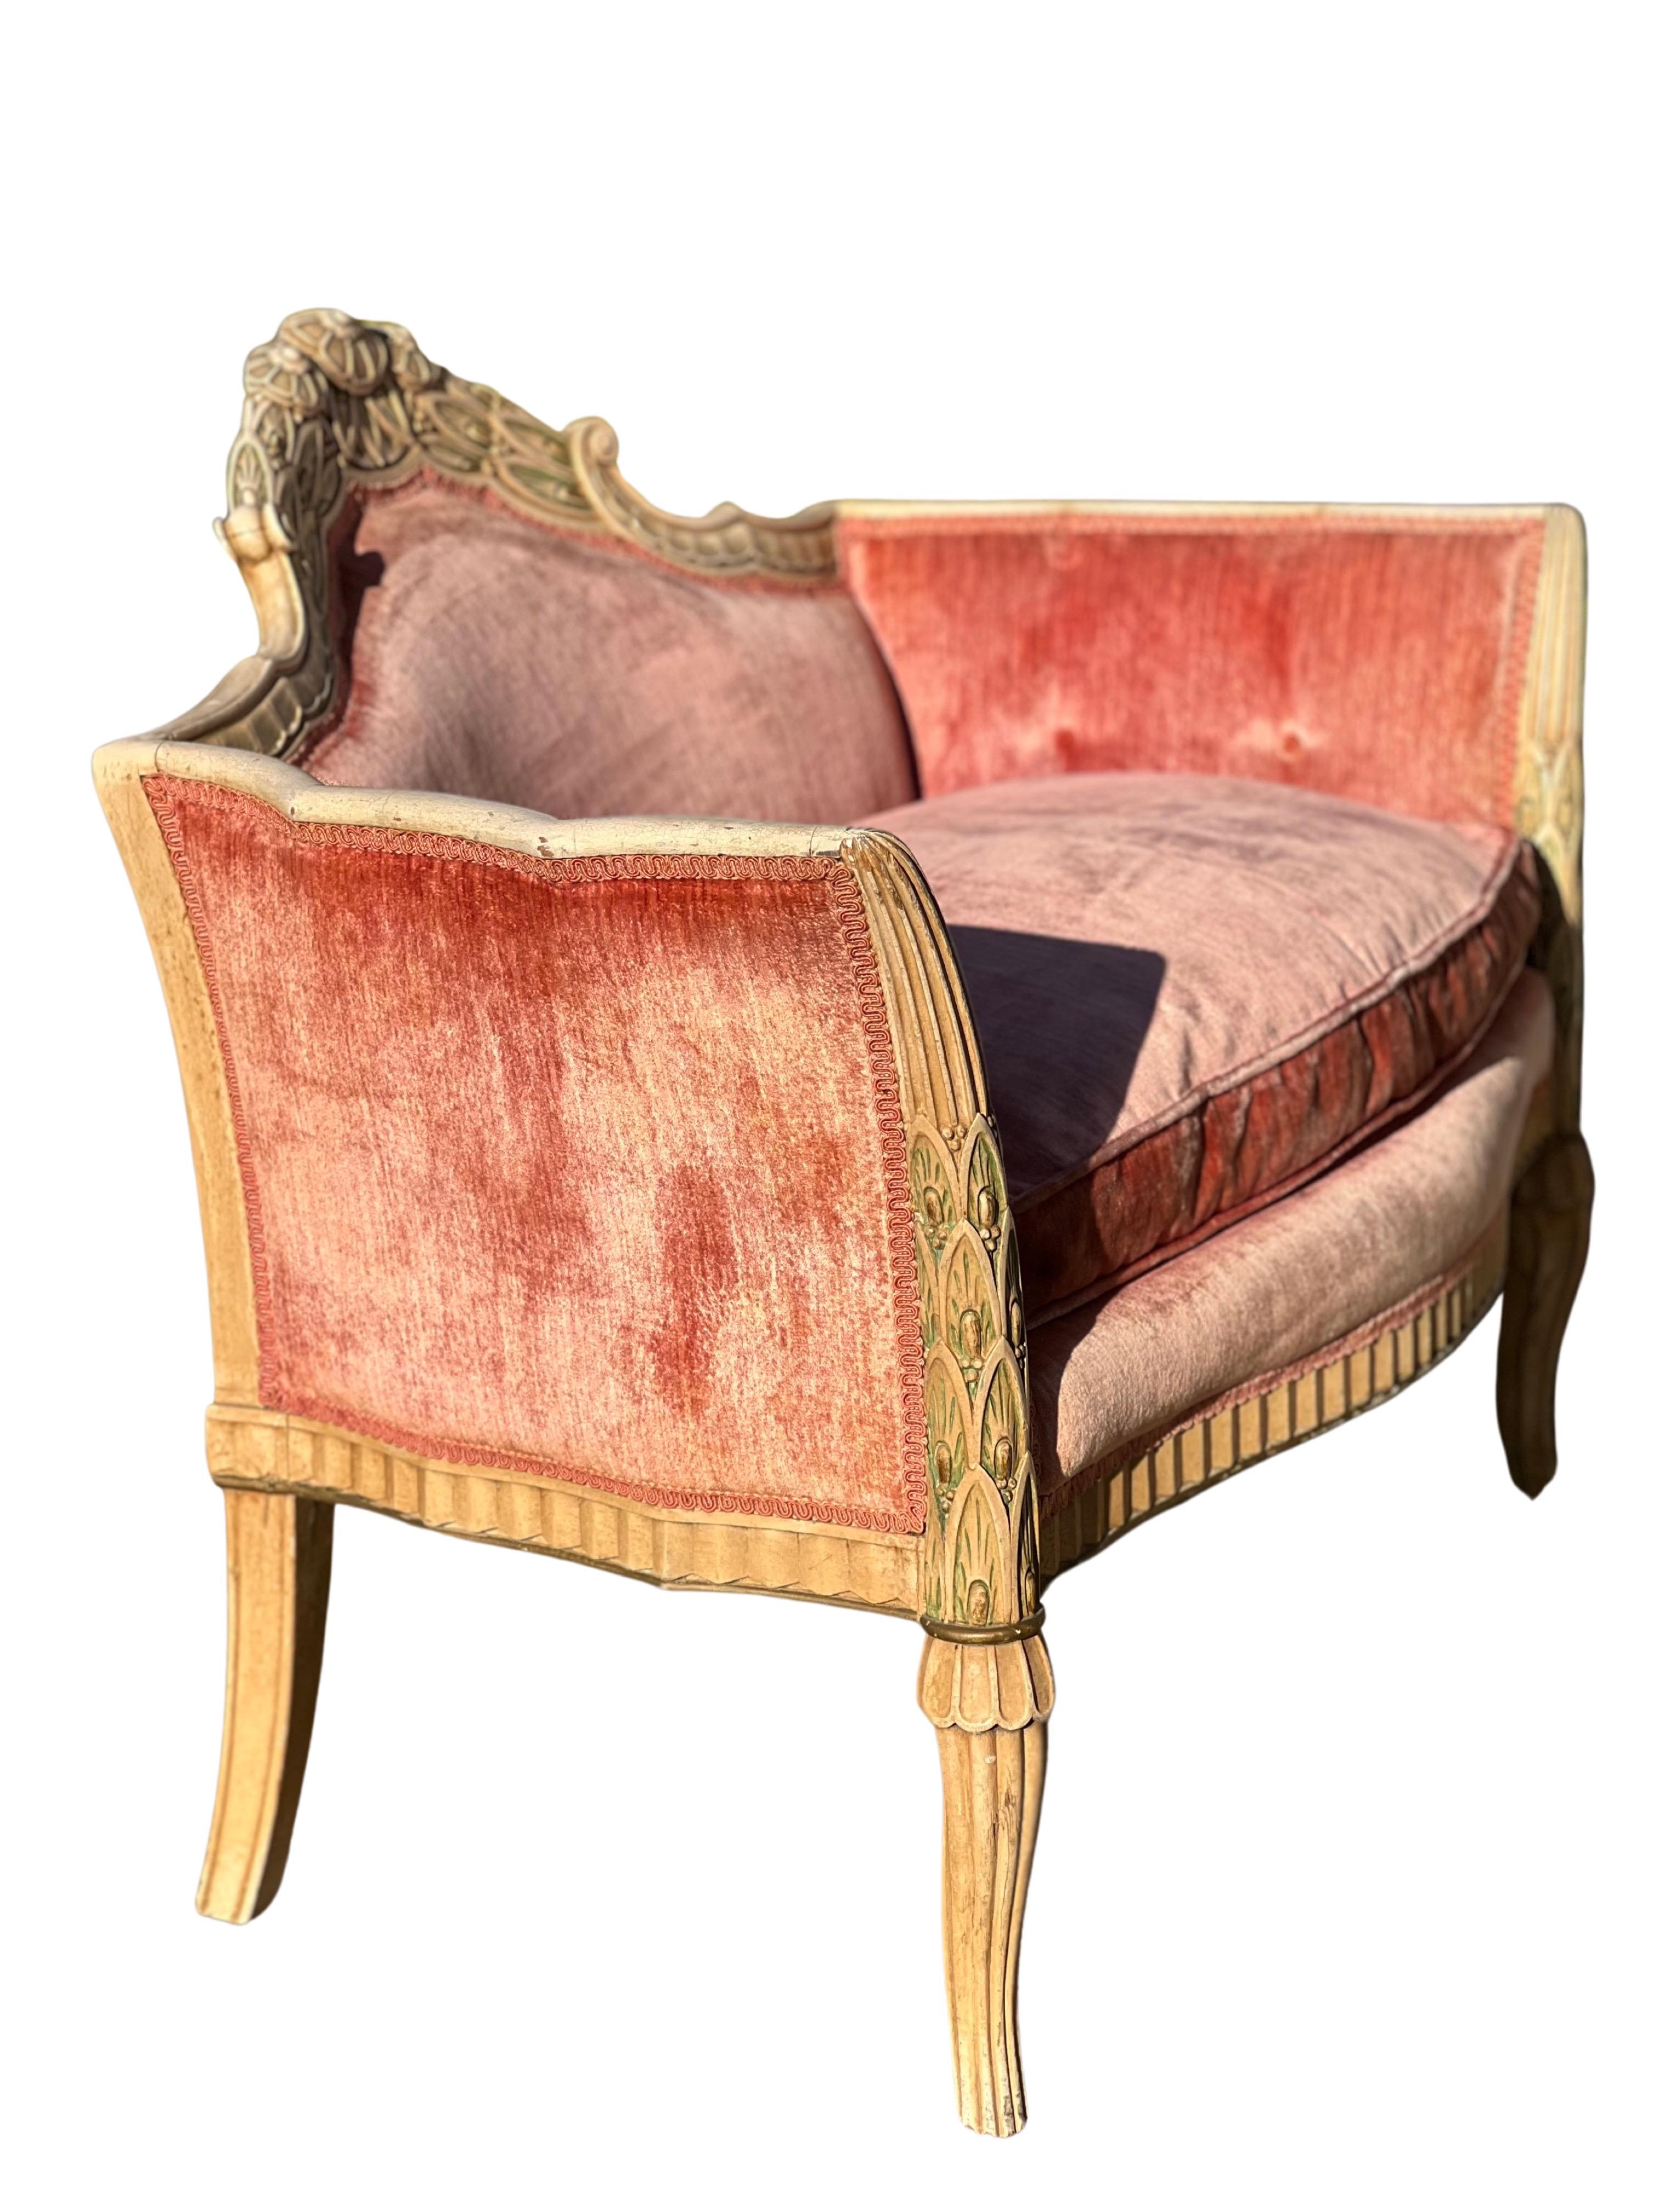 Wonderful 19th century French Louis XVI style settee.

Inspired by French forms of the baroque period, the settee has beautifully carved wood detail throughout. The carved leaf and floral detail on the back crest and sides is superb. Lovely design